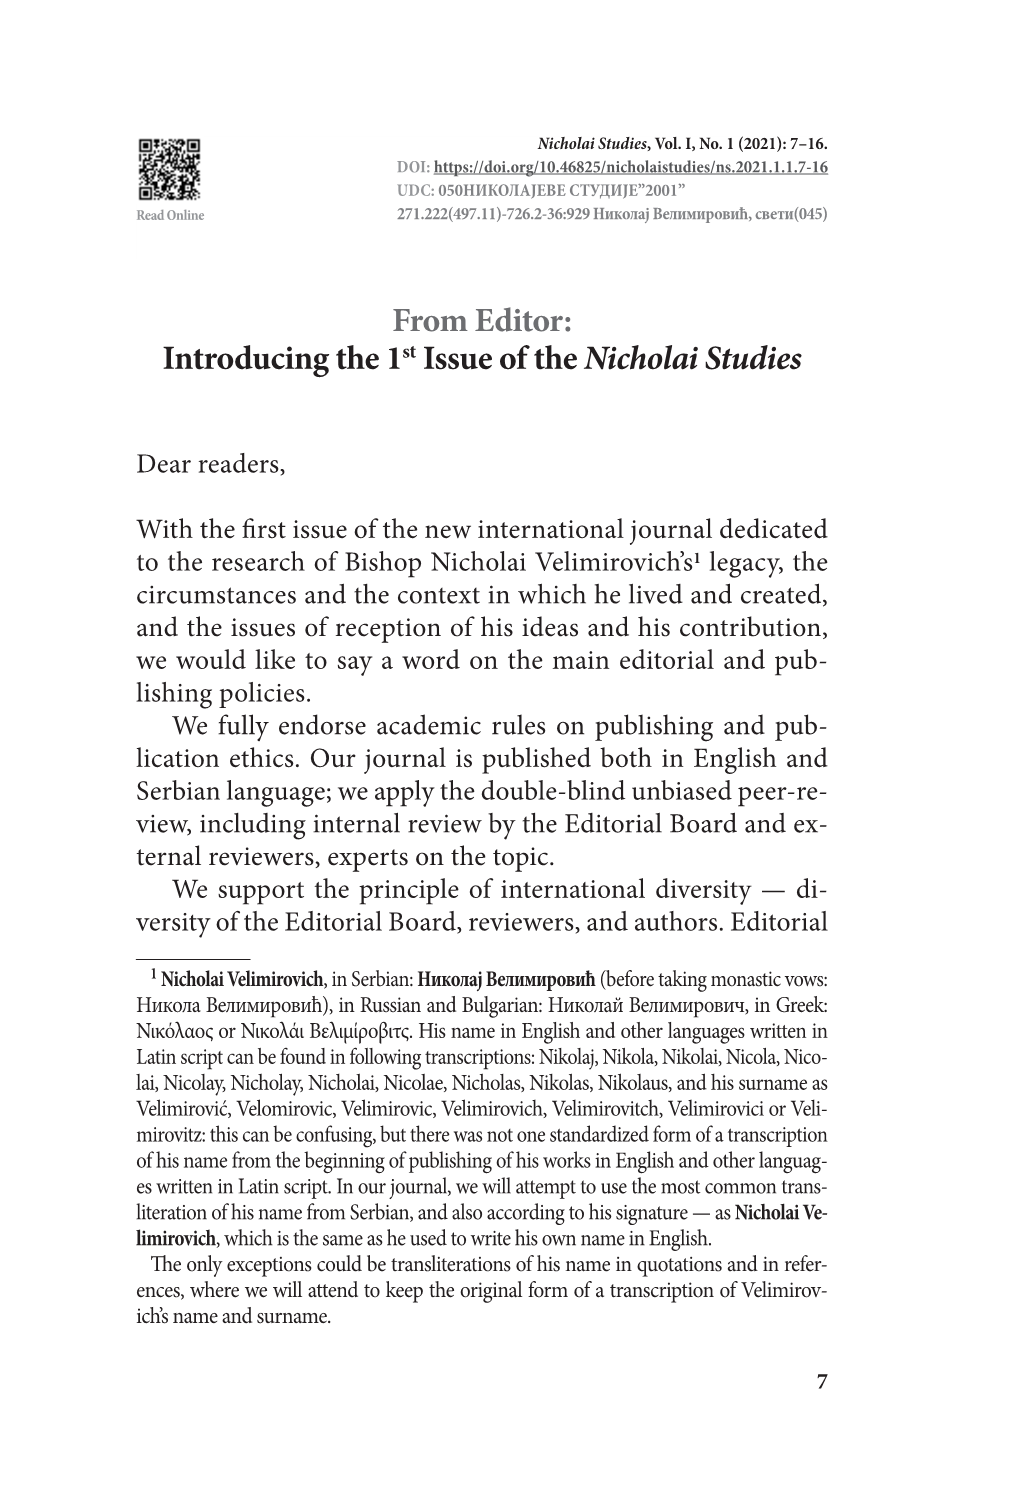 From Editor: Introducing the 1St Issue of the Nicholai Studies